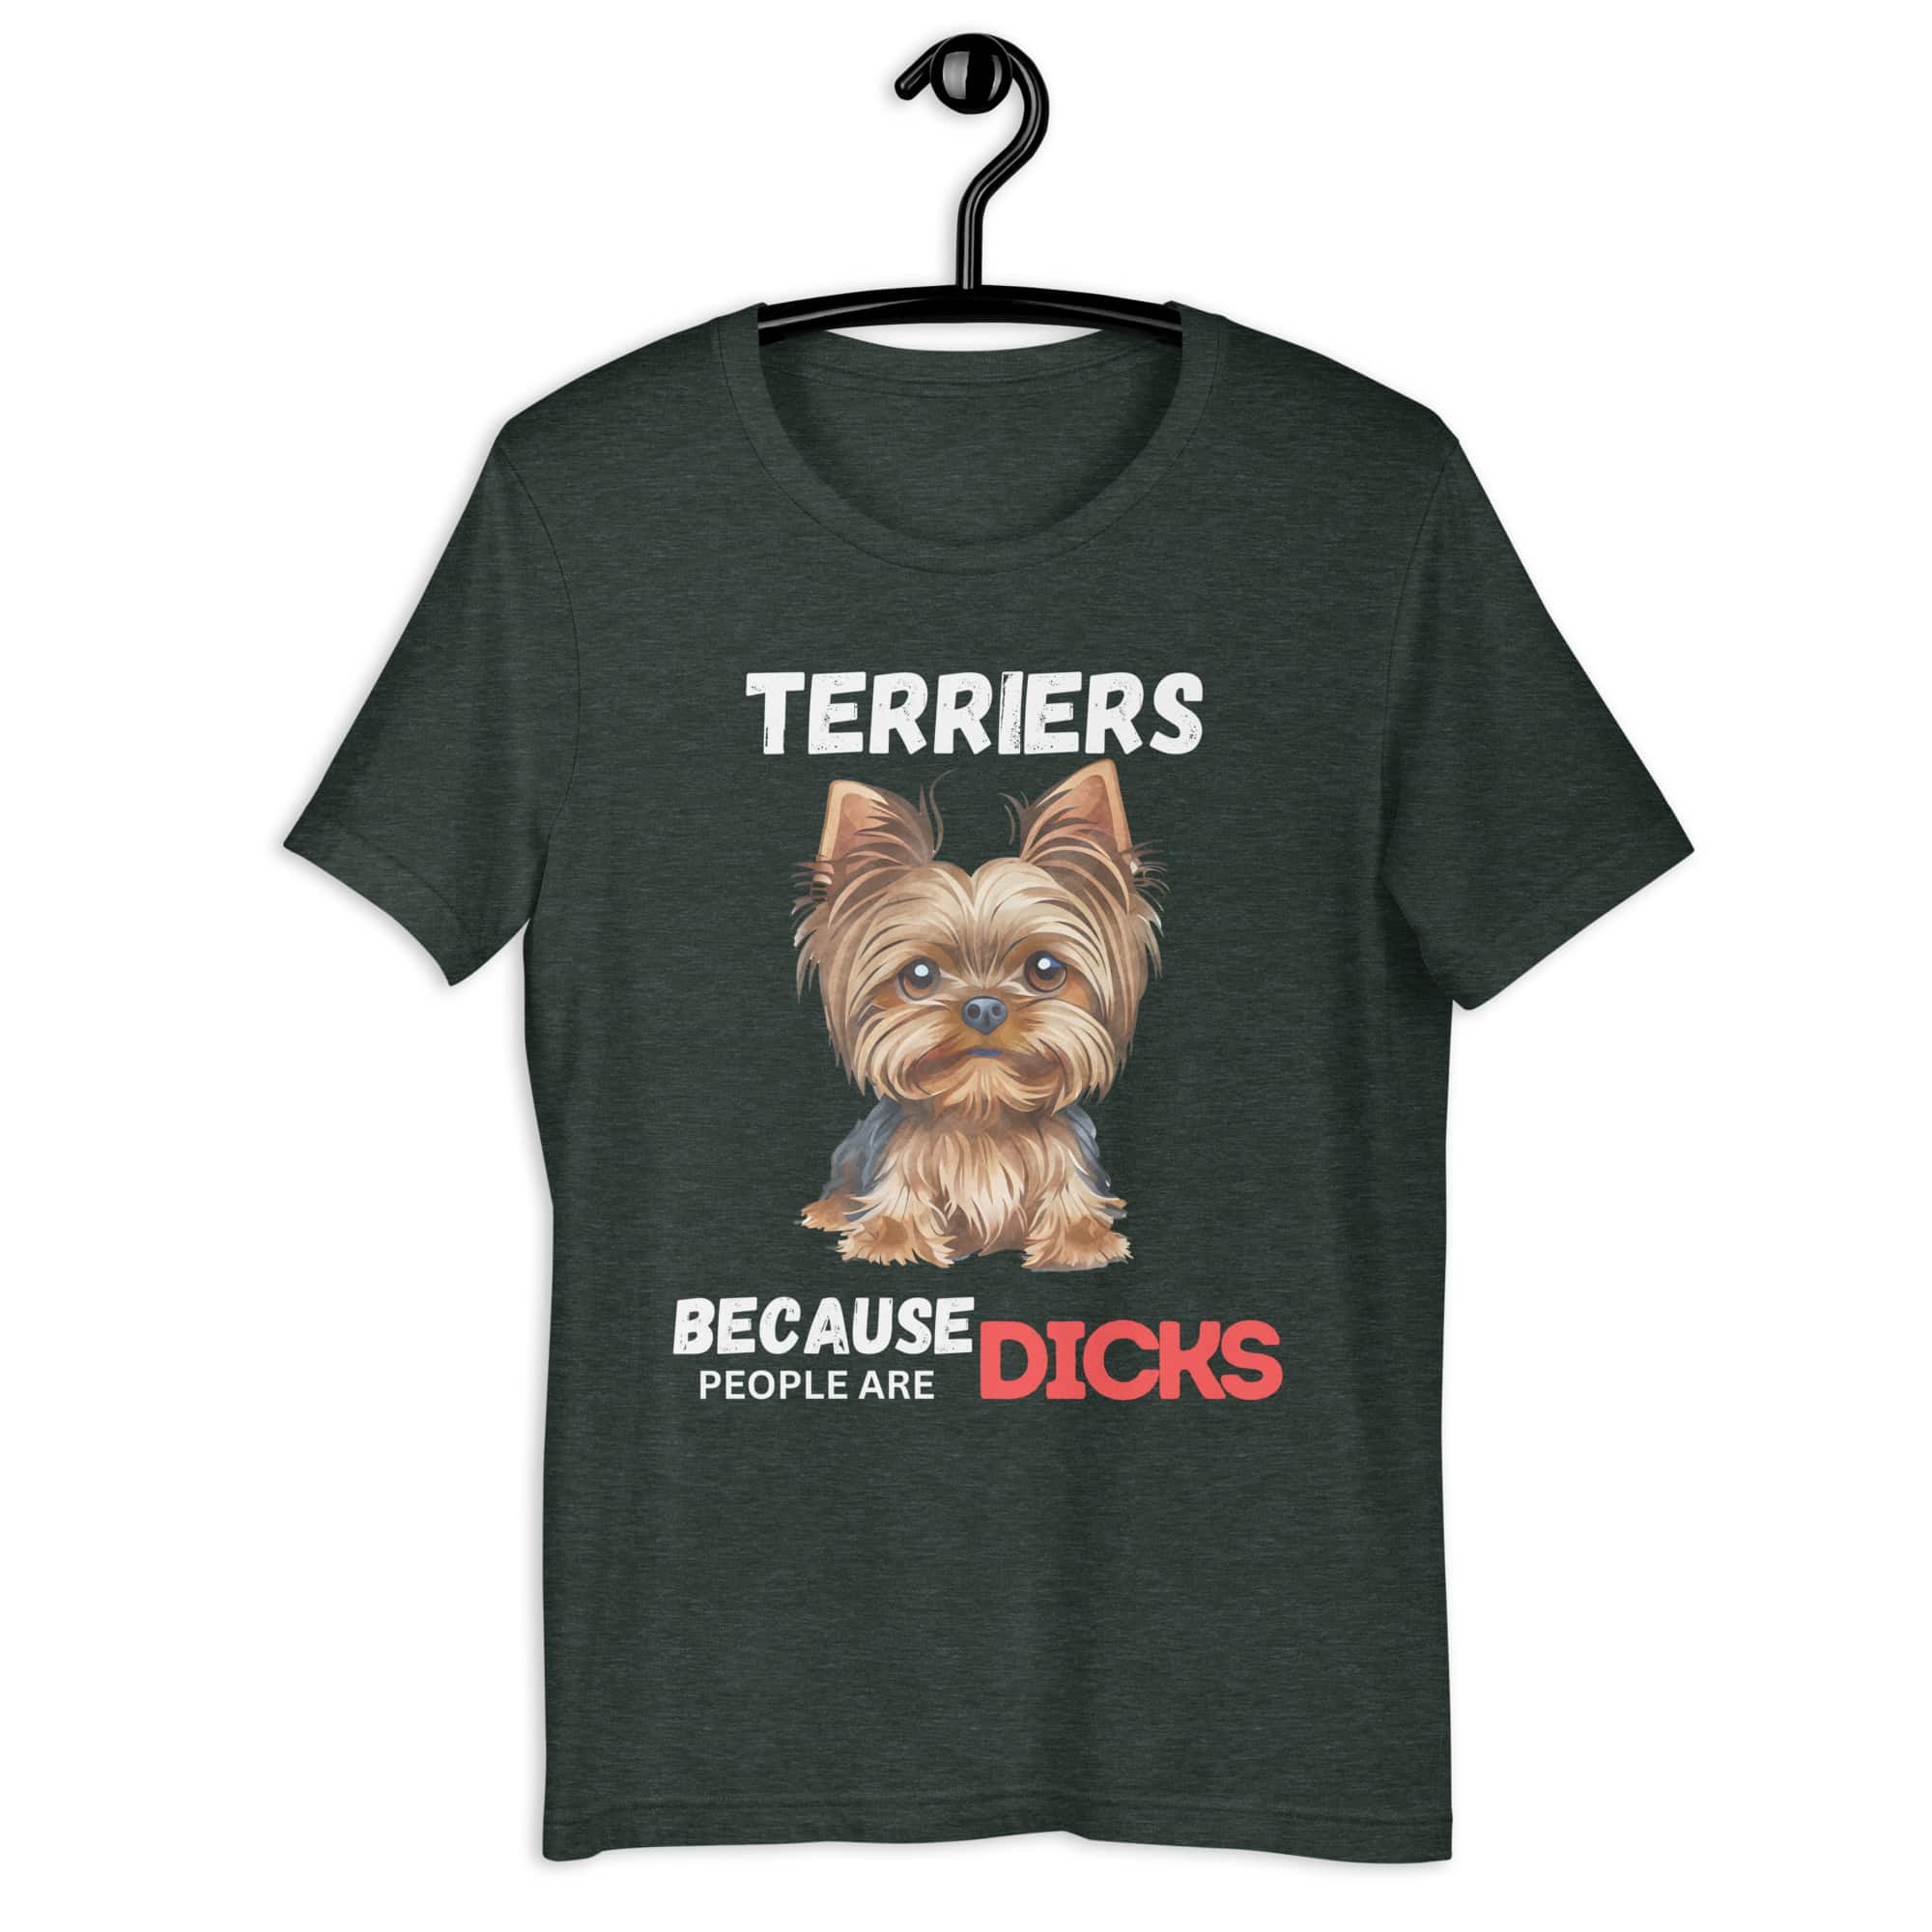 Yorkshire Terriers Because People Are Dicks Unisex T-Shirt - dark